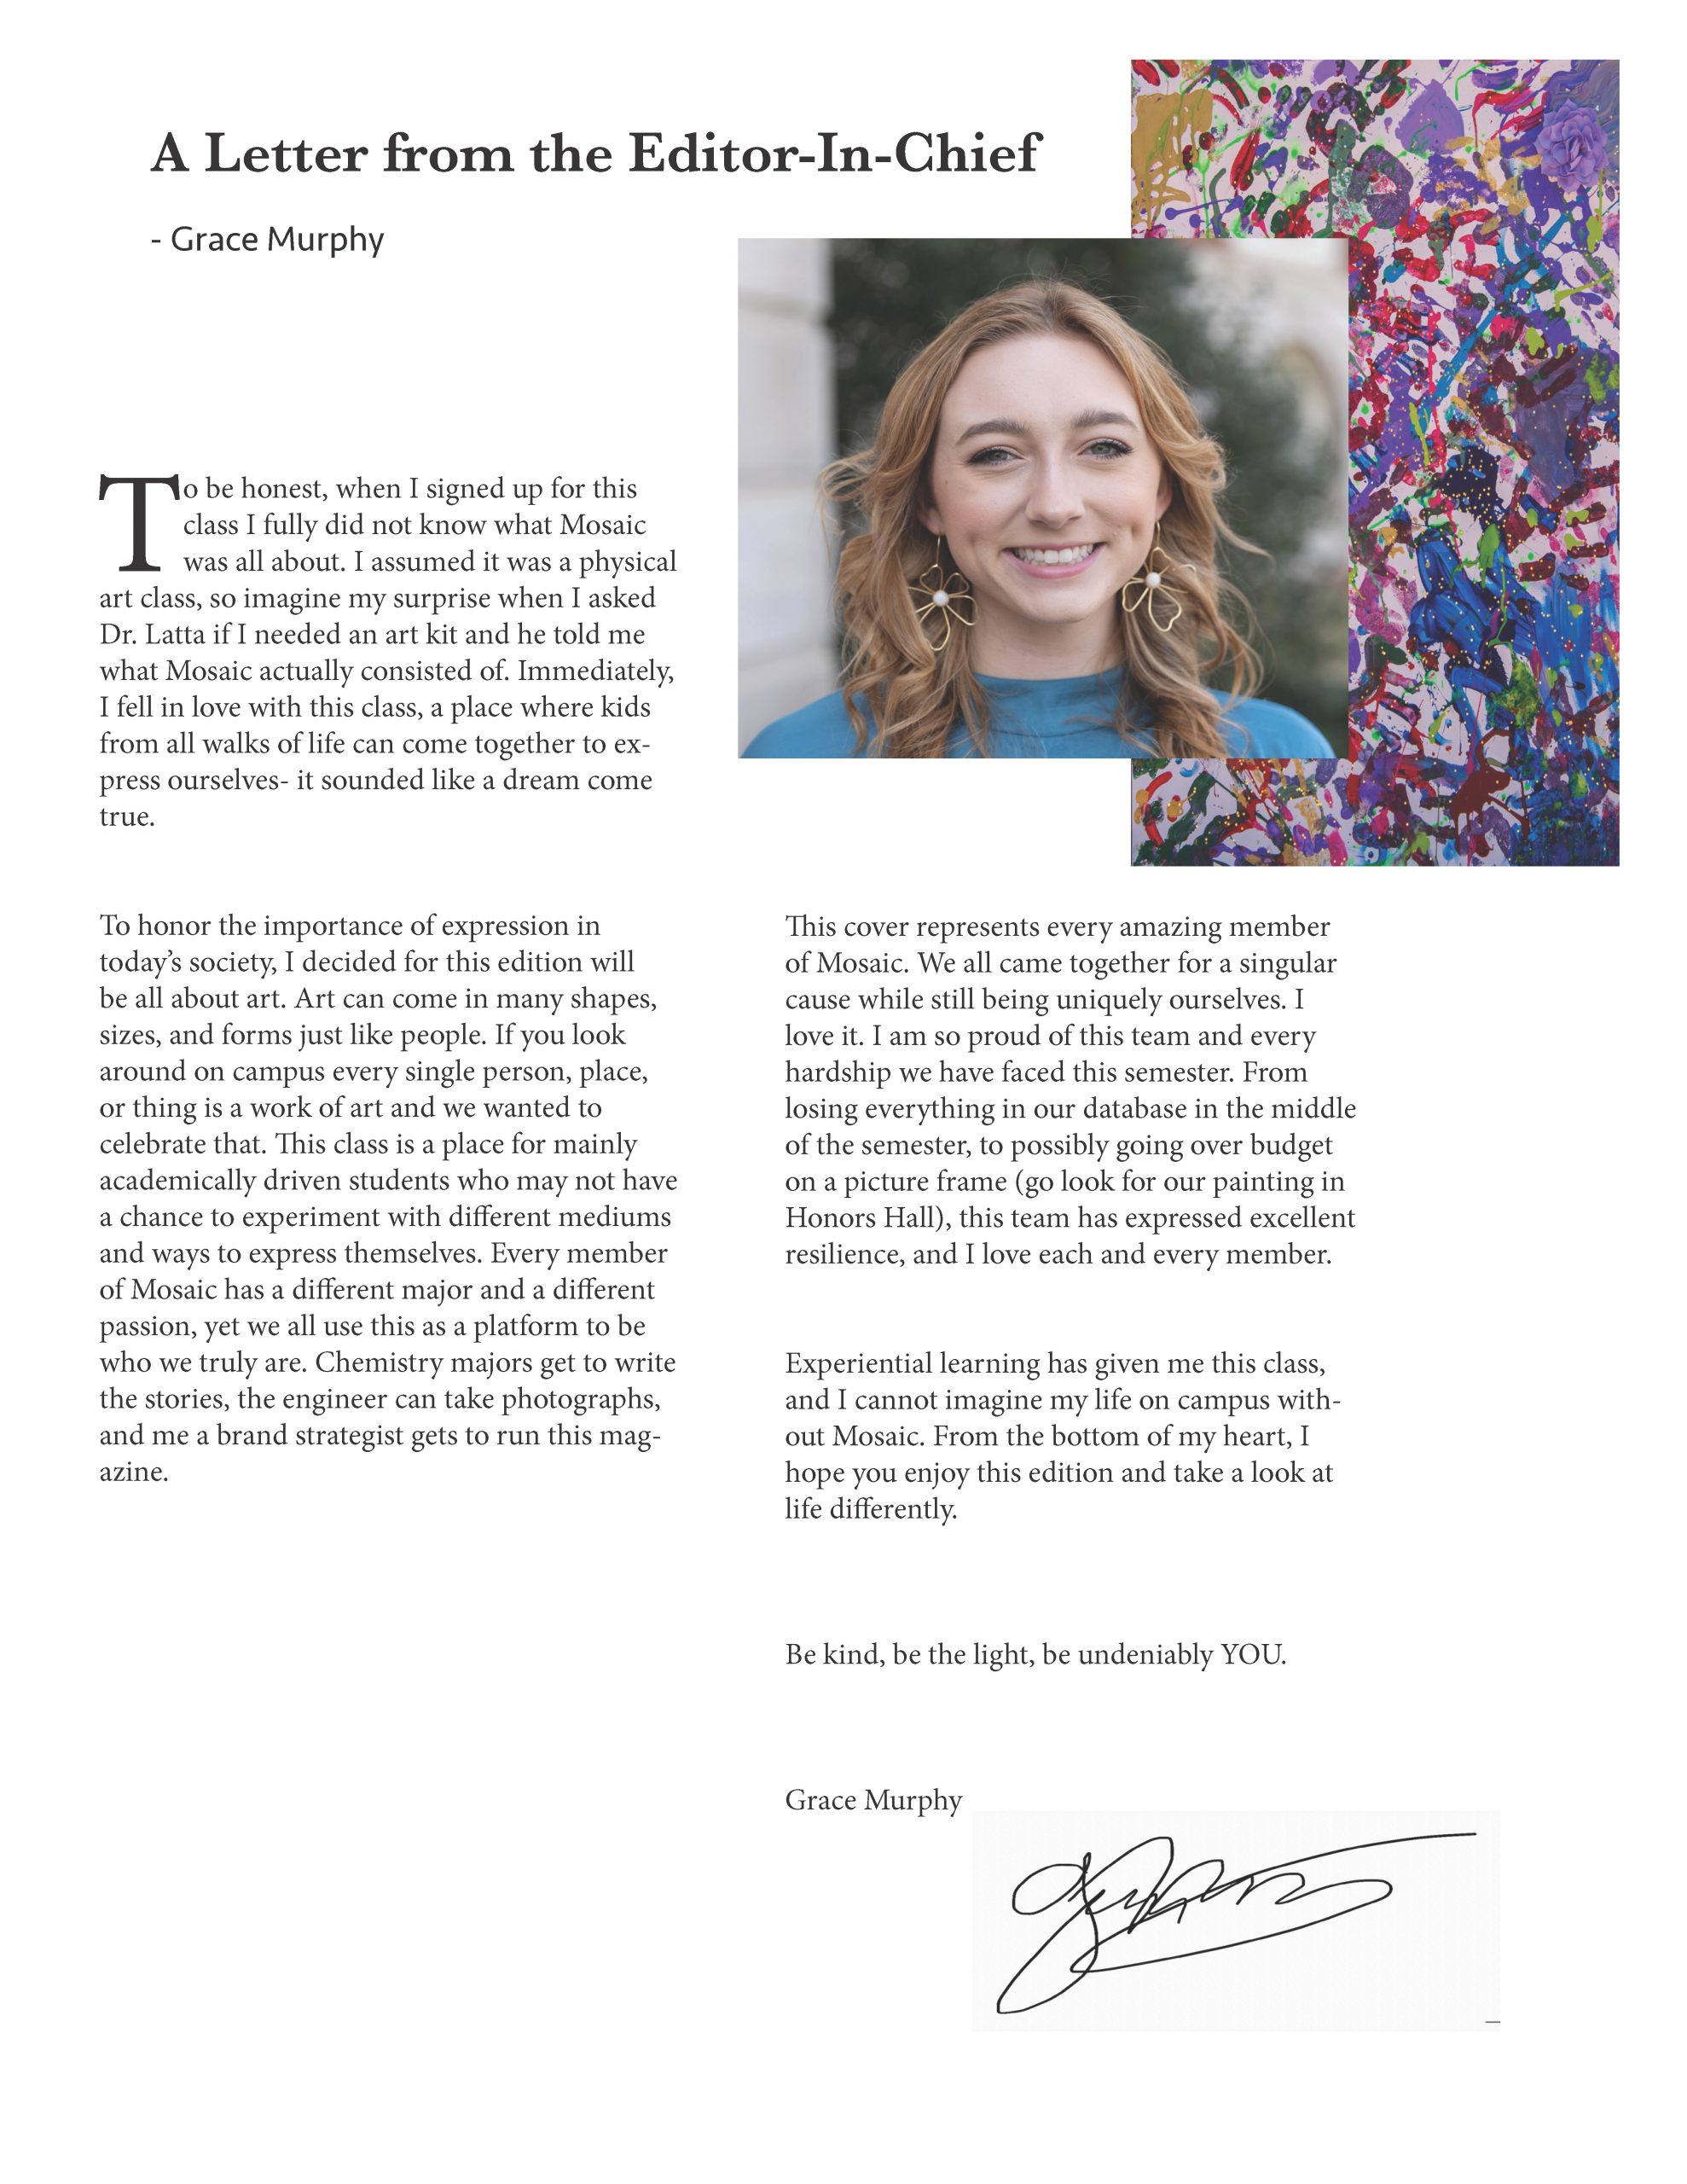 The Art Issue Spring 2023 Letter from the Editor-in-Chief